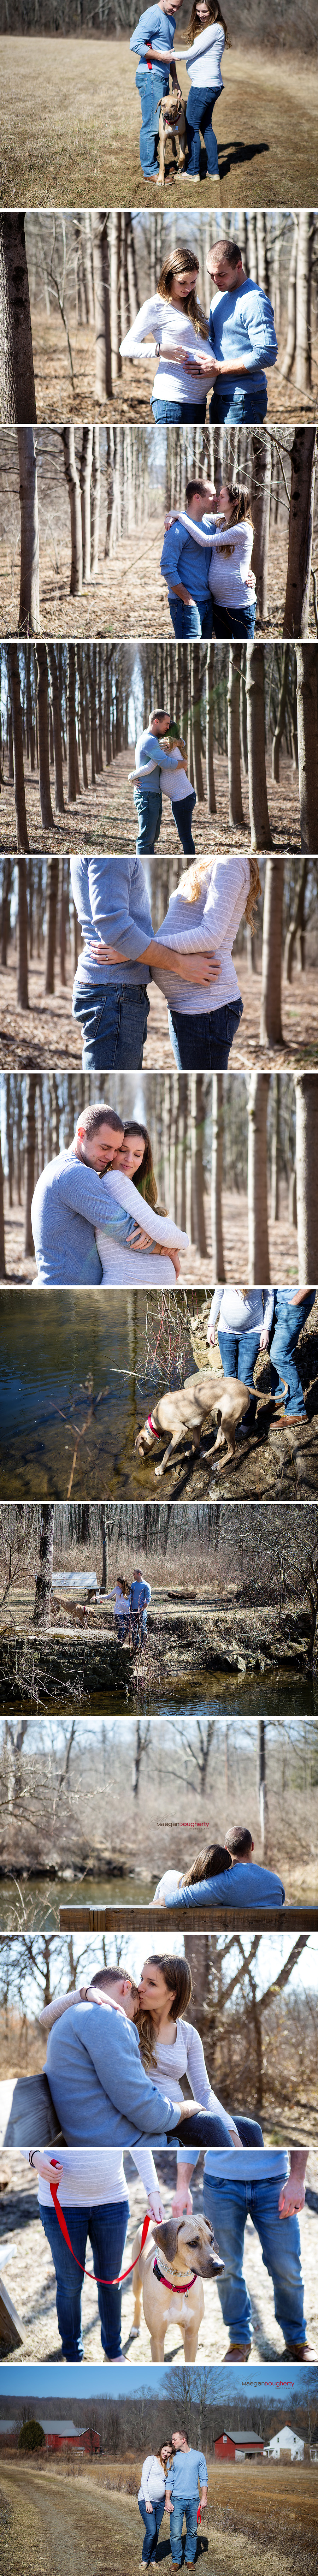 A New Jersey couple expecting their first baby has a documentary maternity photo session in their home and a park near their house, with their cat and dog, while they get their daughter